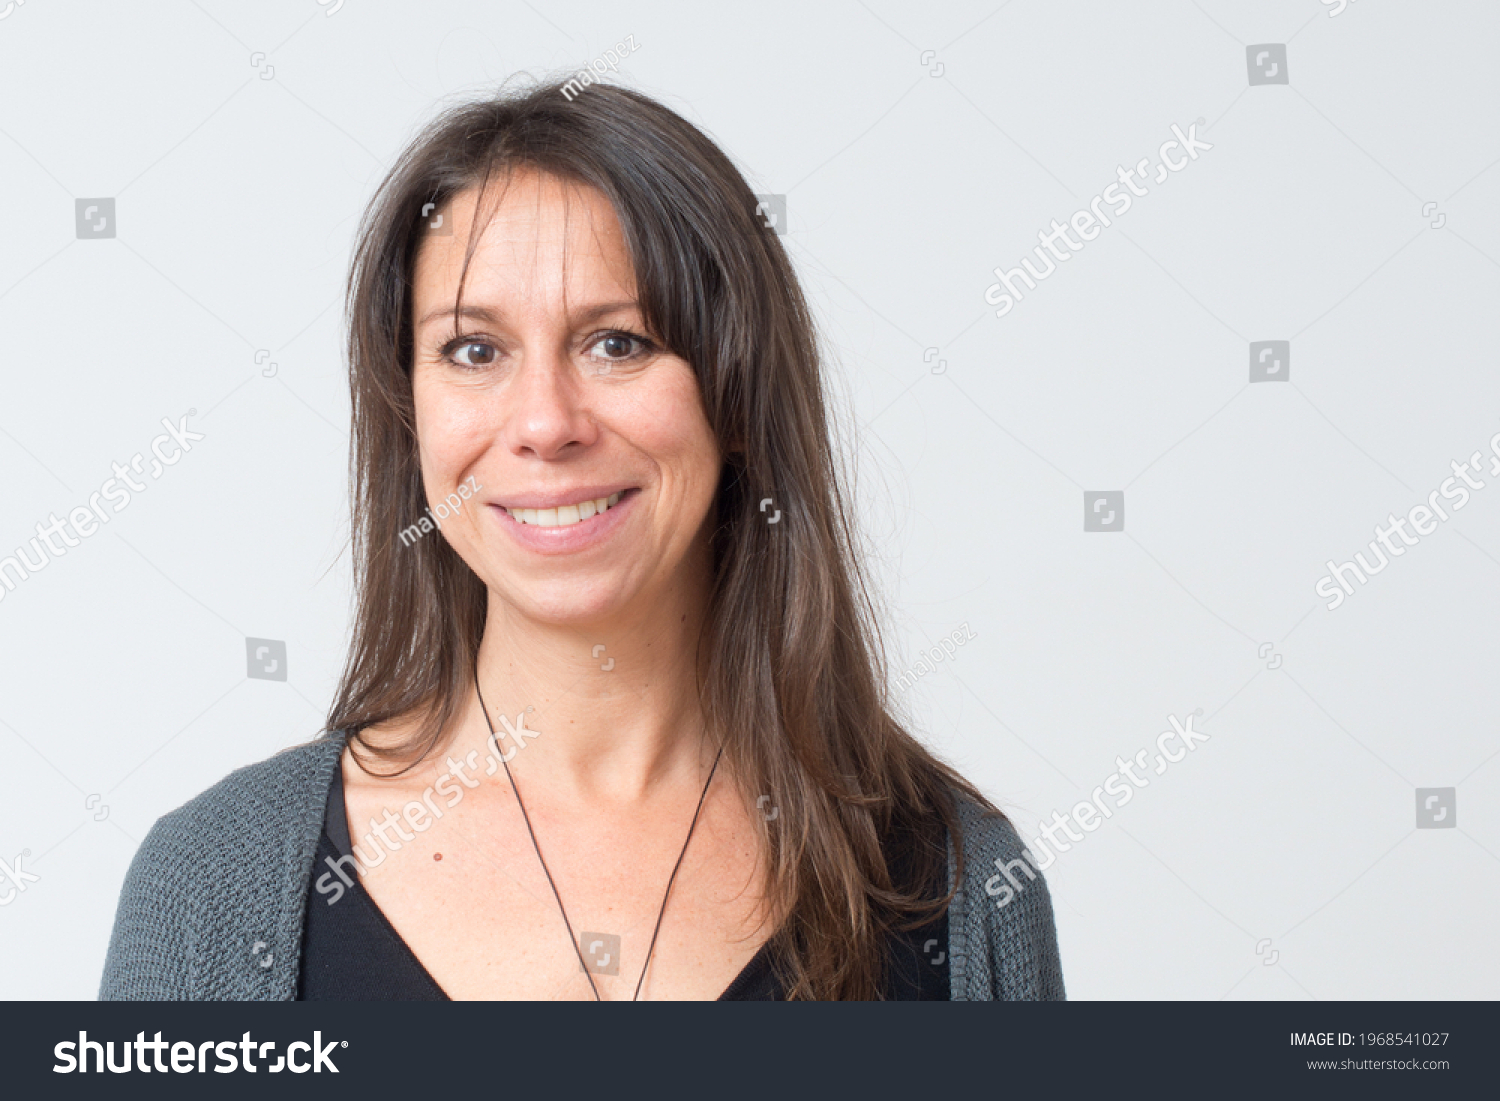 Headshot of a mediterranean woman aged 30-40 with a friendly big smile and white background #1968541027